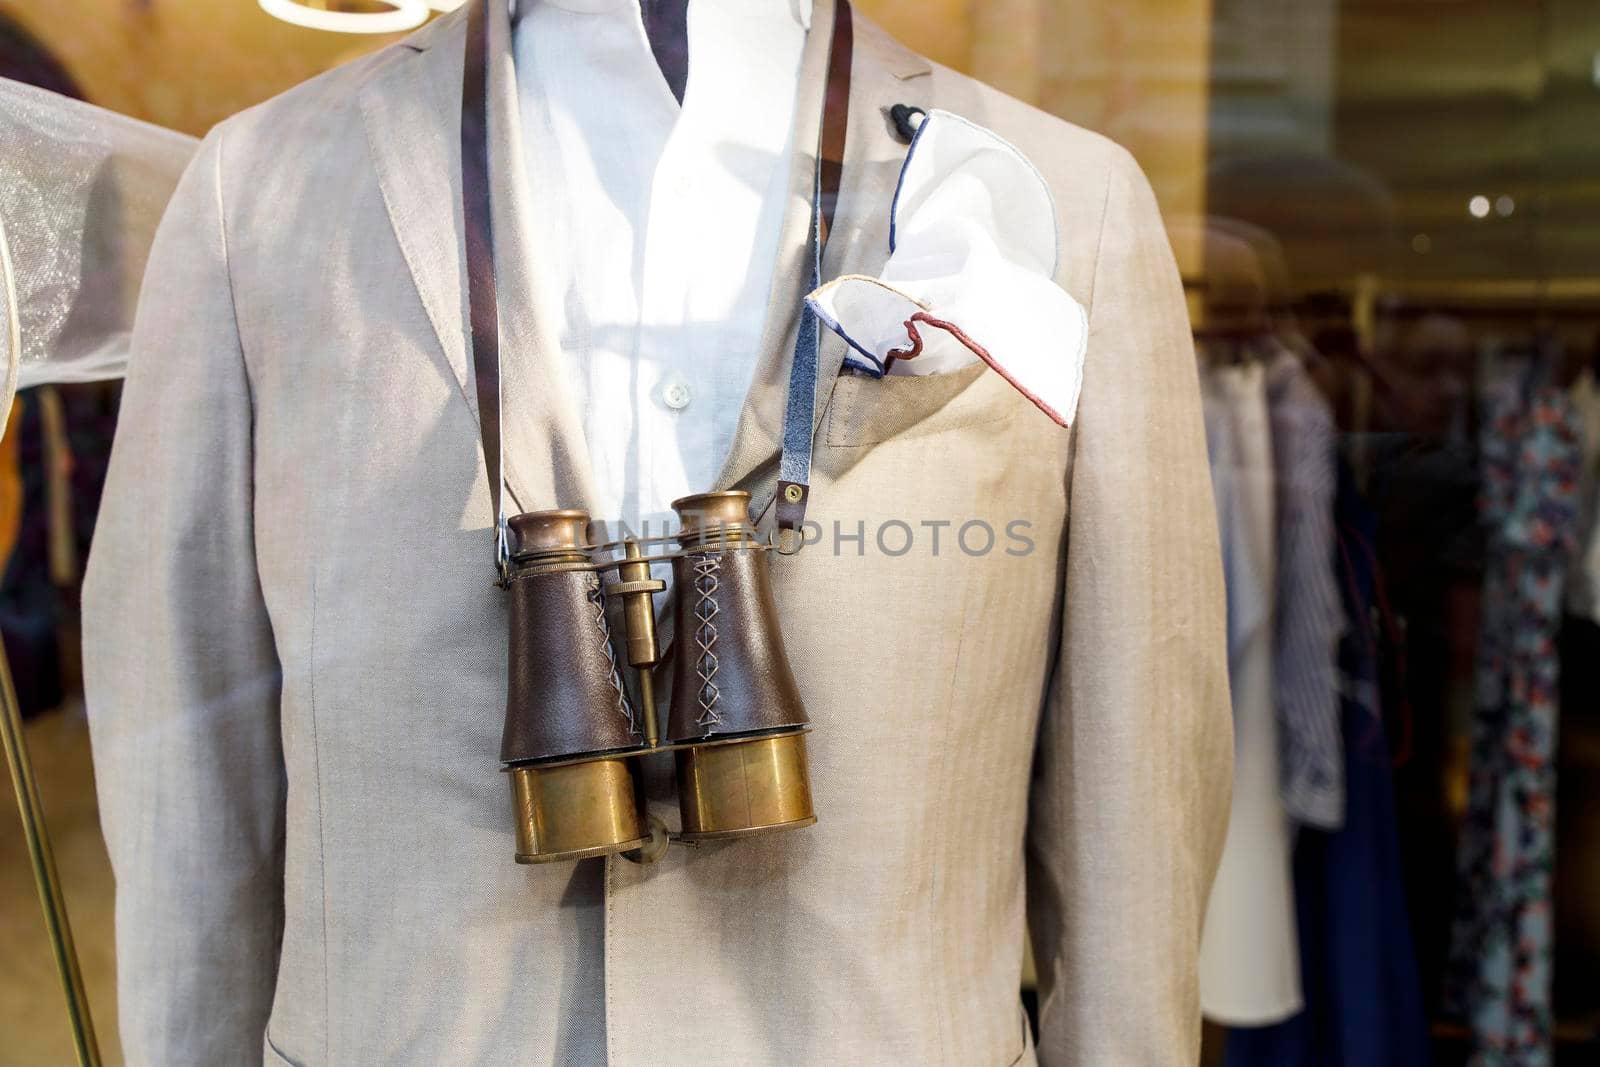 A fragment of a beige jacket and large vintage binoculars on the chest of a mannequin